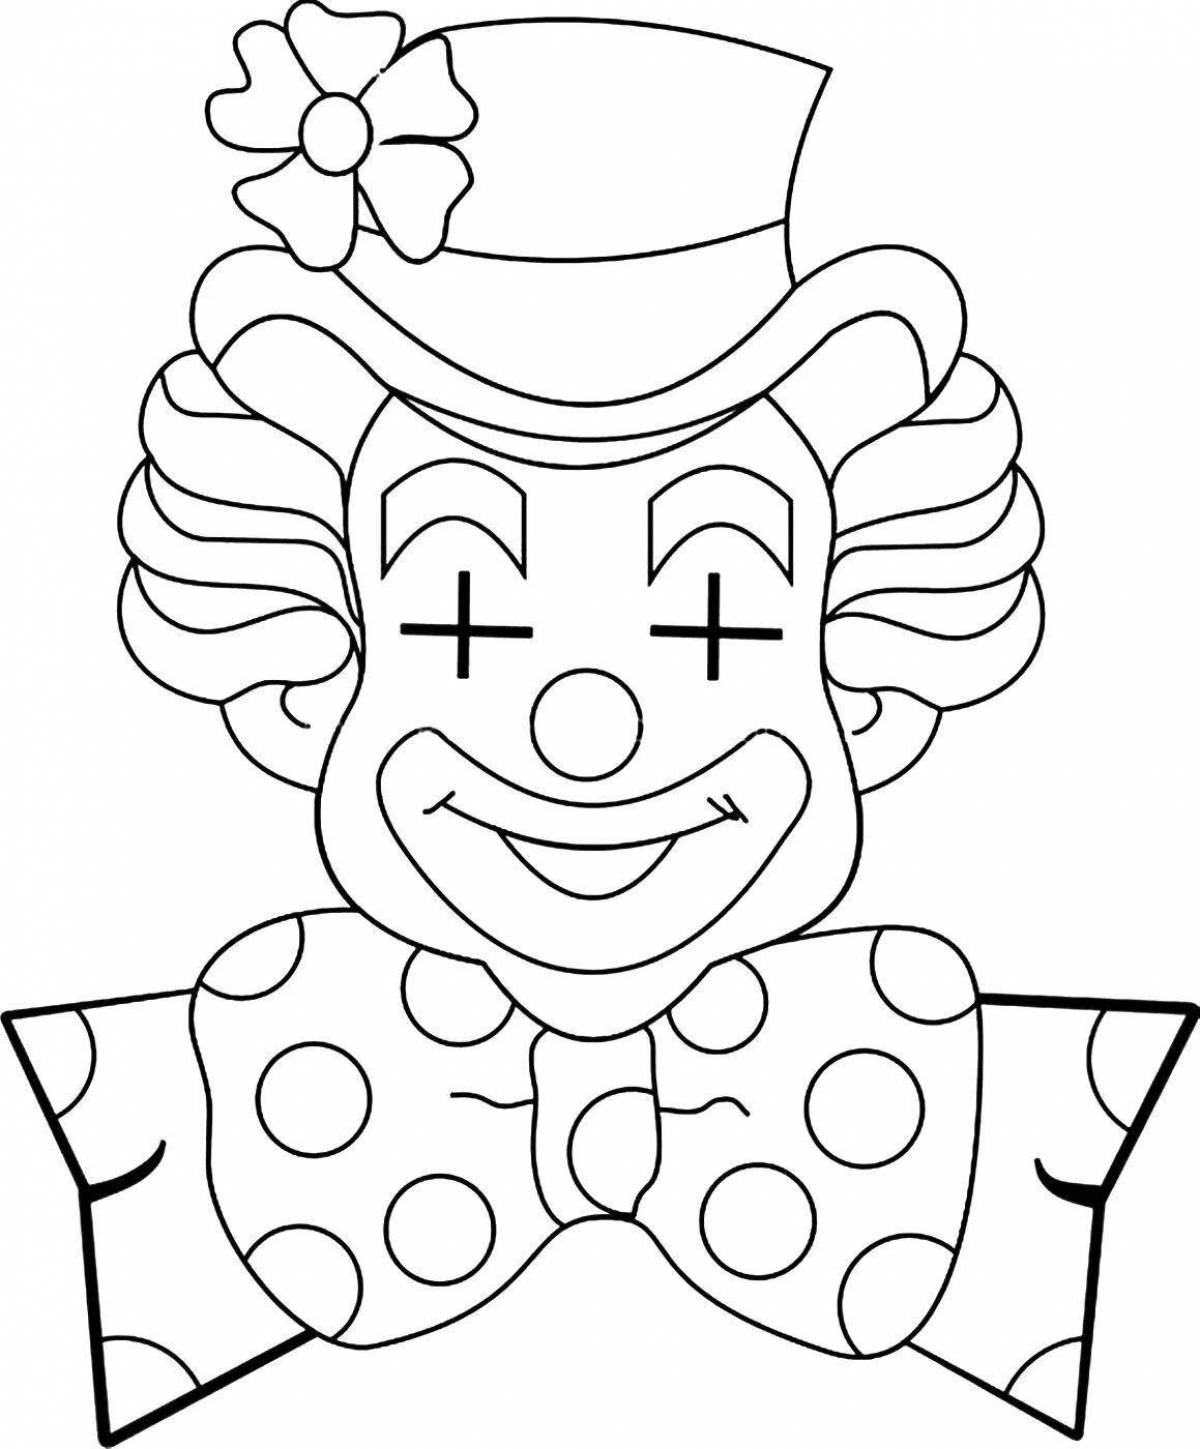 Exciting coloring clown mask